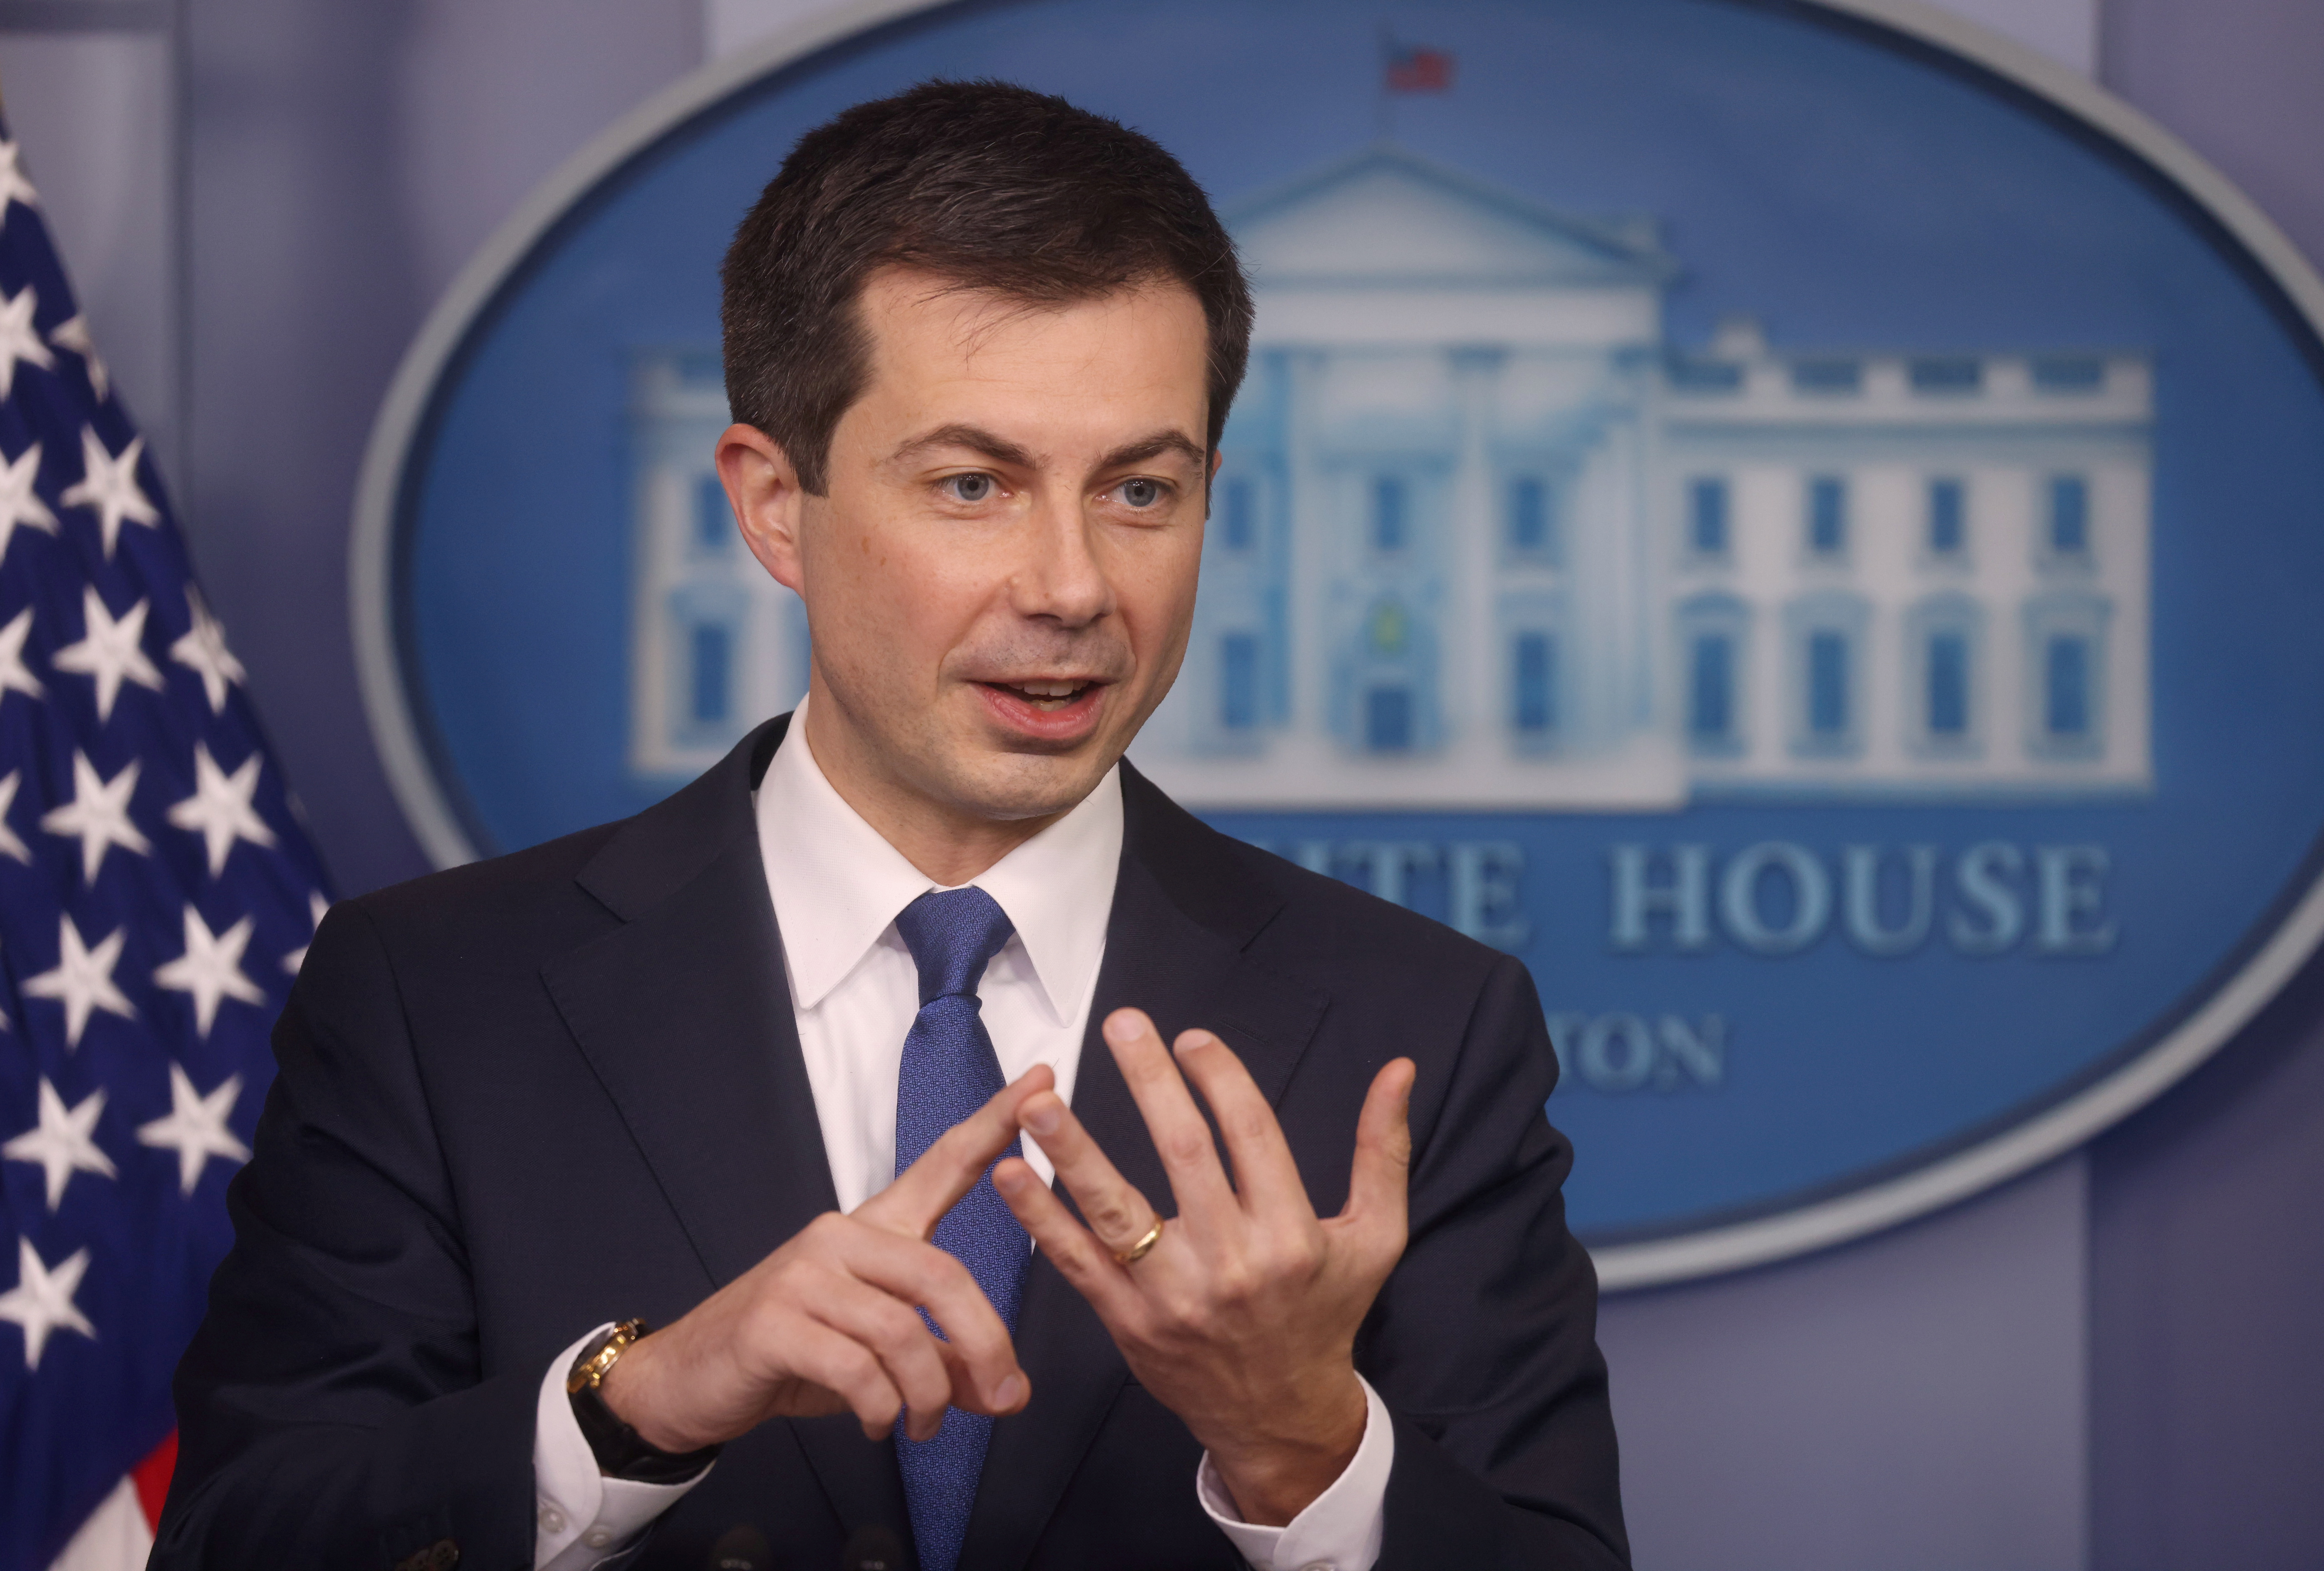 U.S. Secretary of Transportation Pete Buttigieg speaks to the news media during a press briefing at the White House in Washington